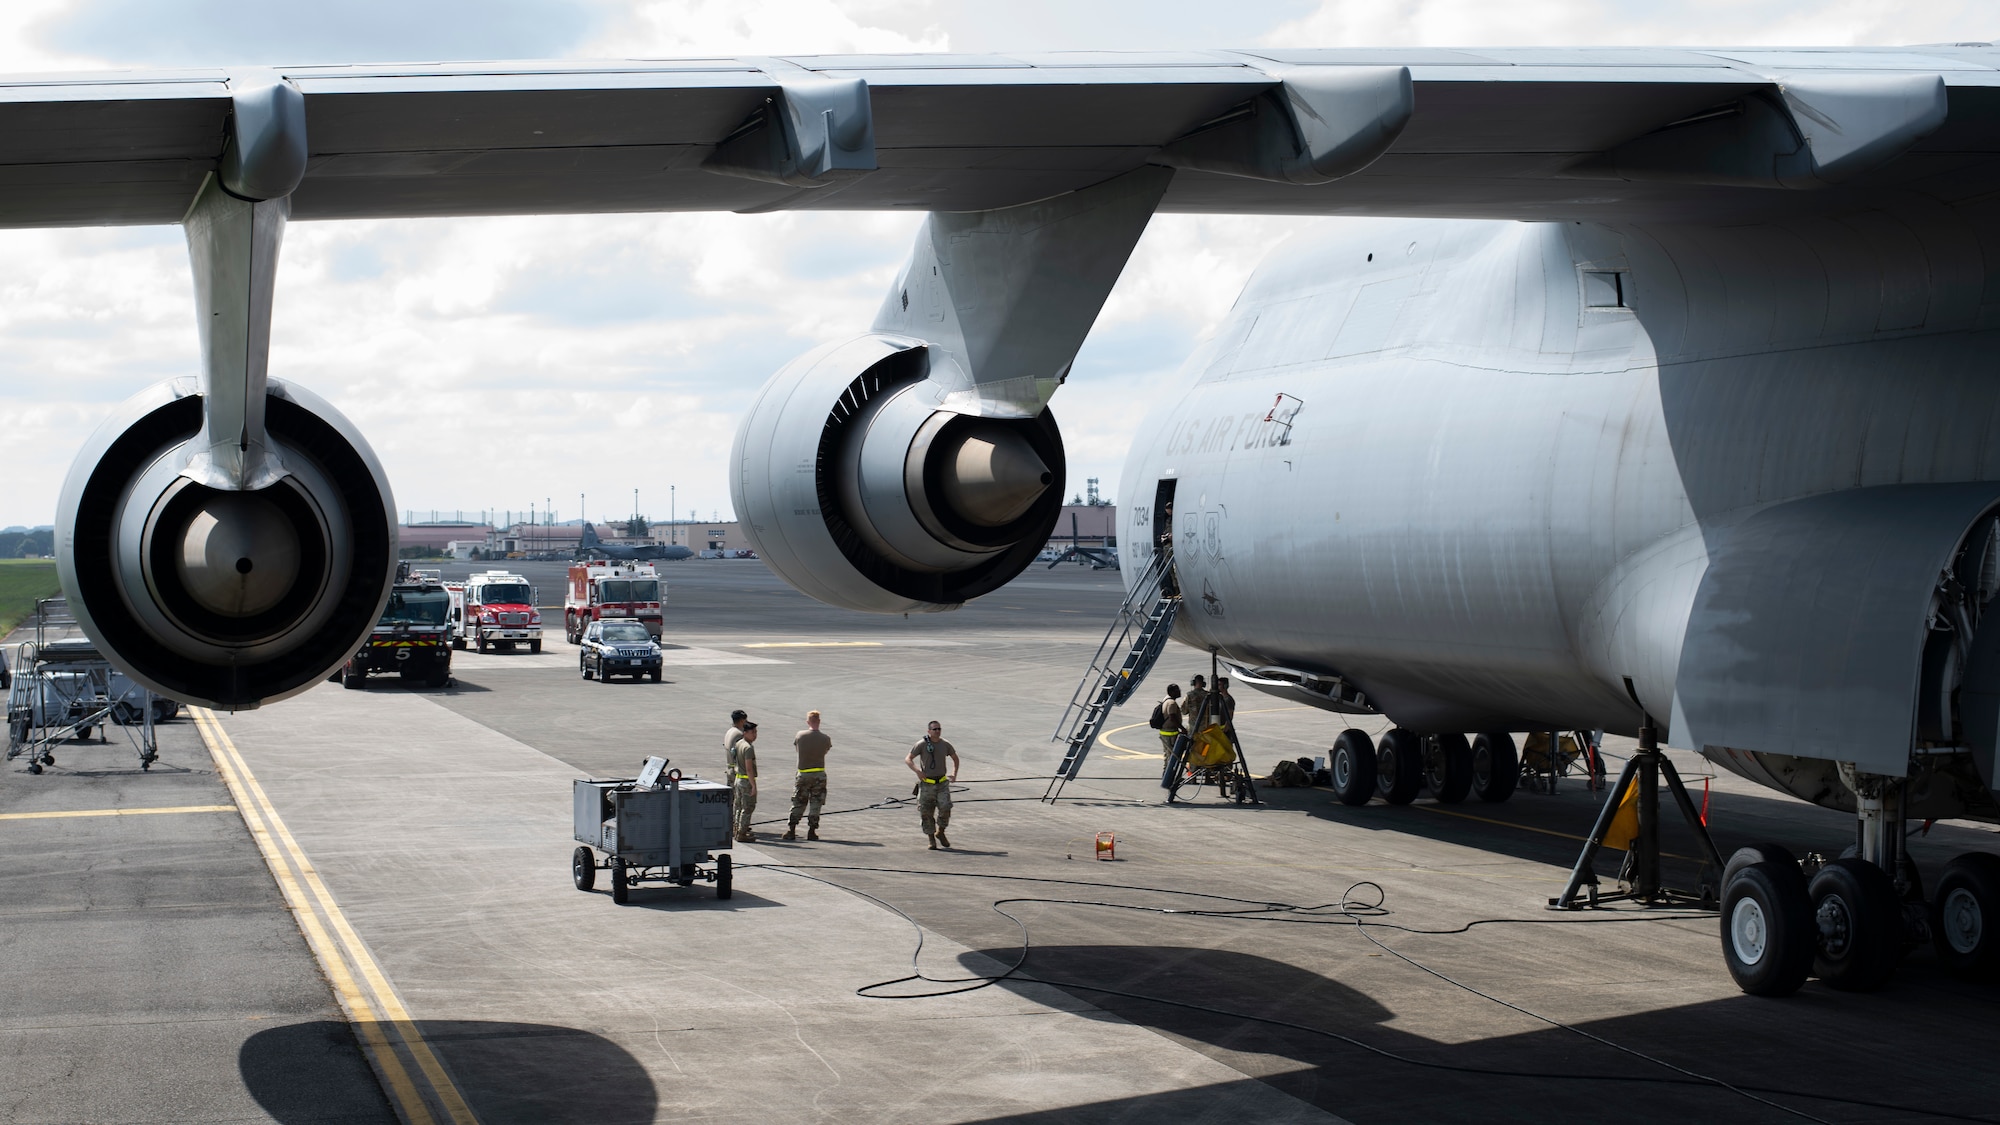 Wide side-view of a very large cargo plane with three red fire trucks in the in-front of it